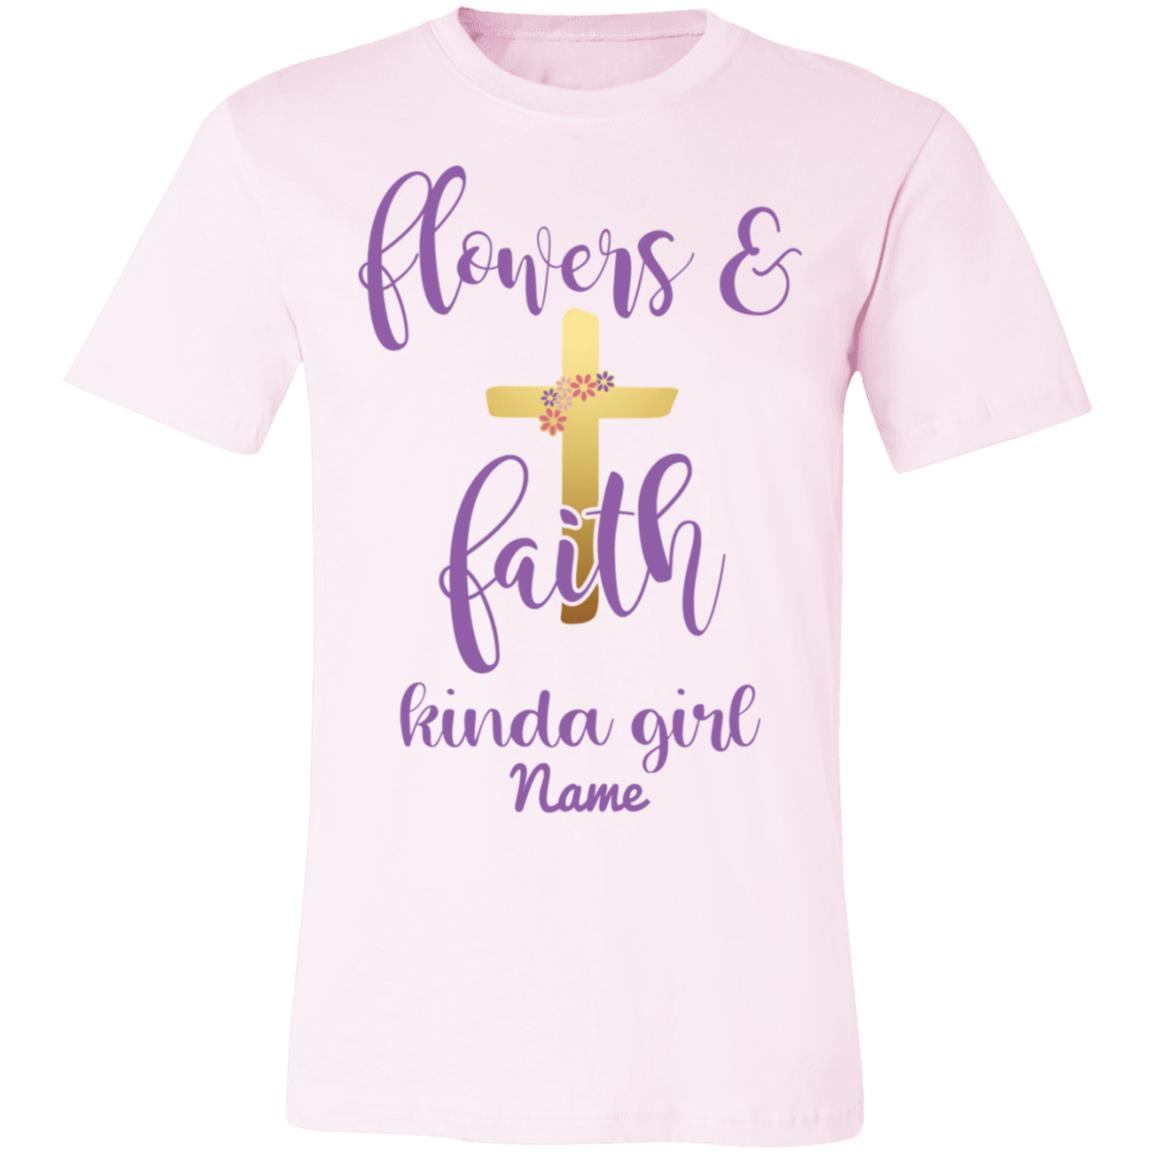 T-Shirts - Personalized Christian Themed T-shirts - Flowers And Faith Kind Of Girl